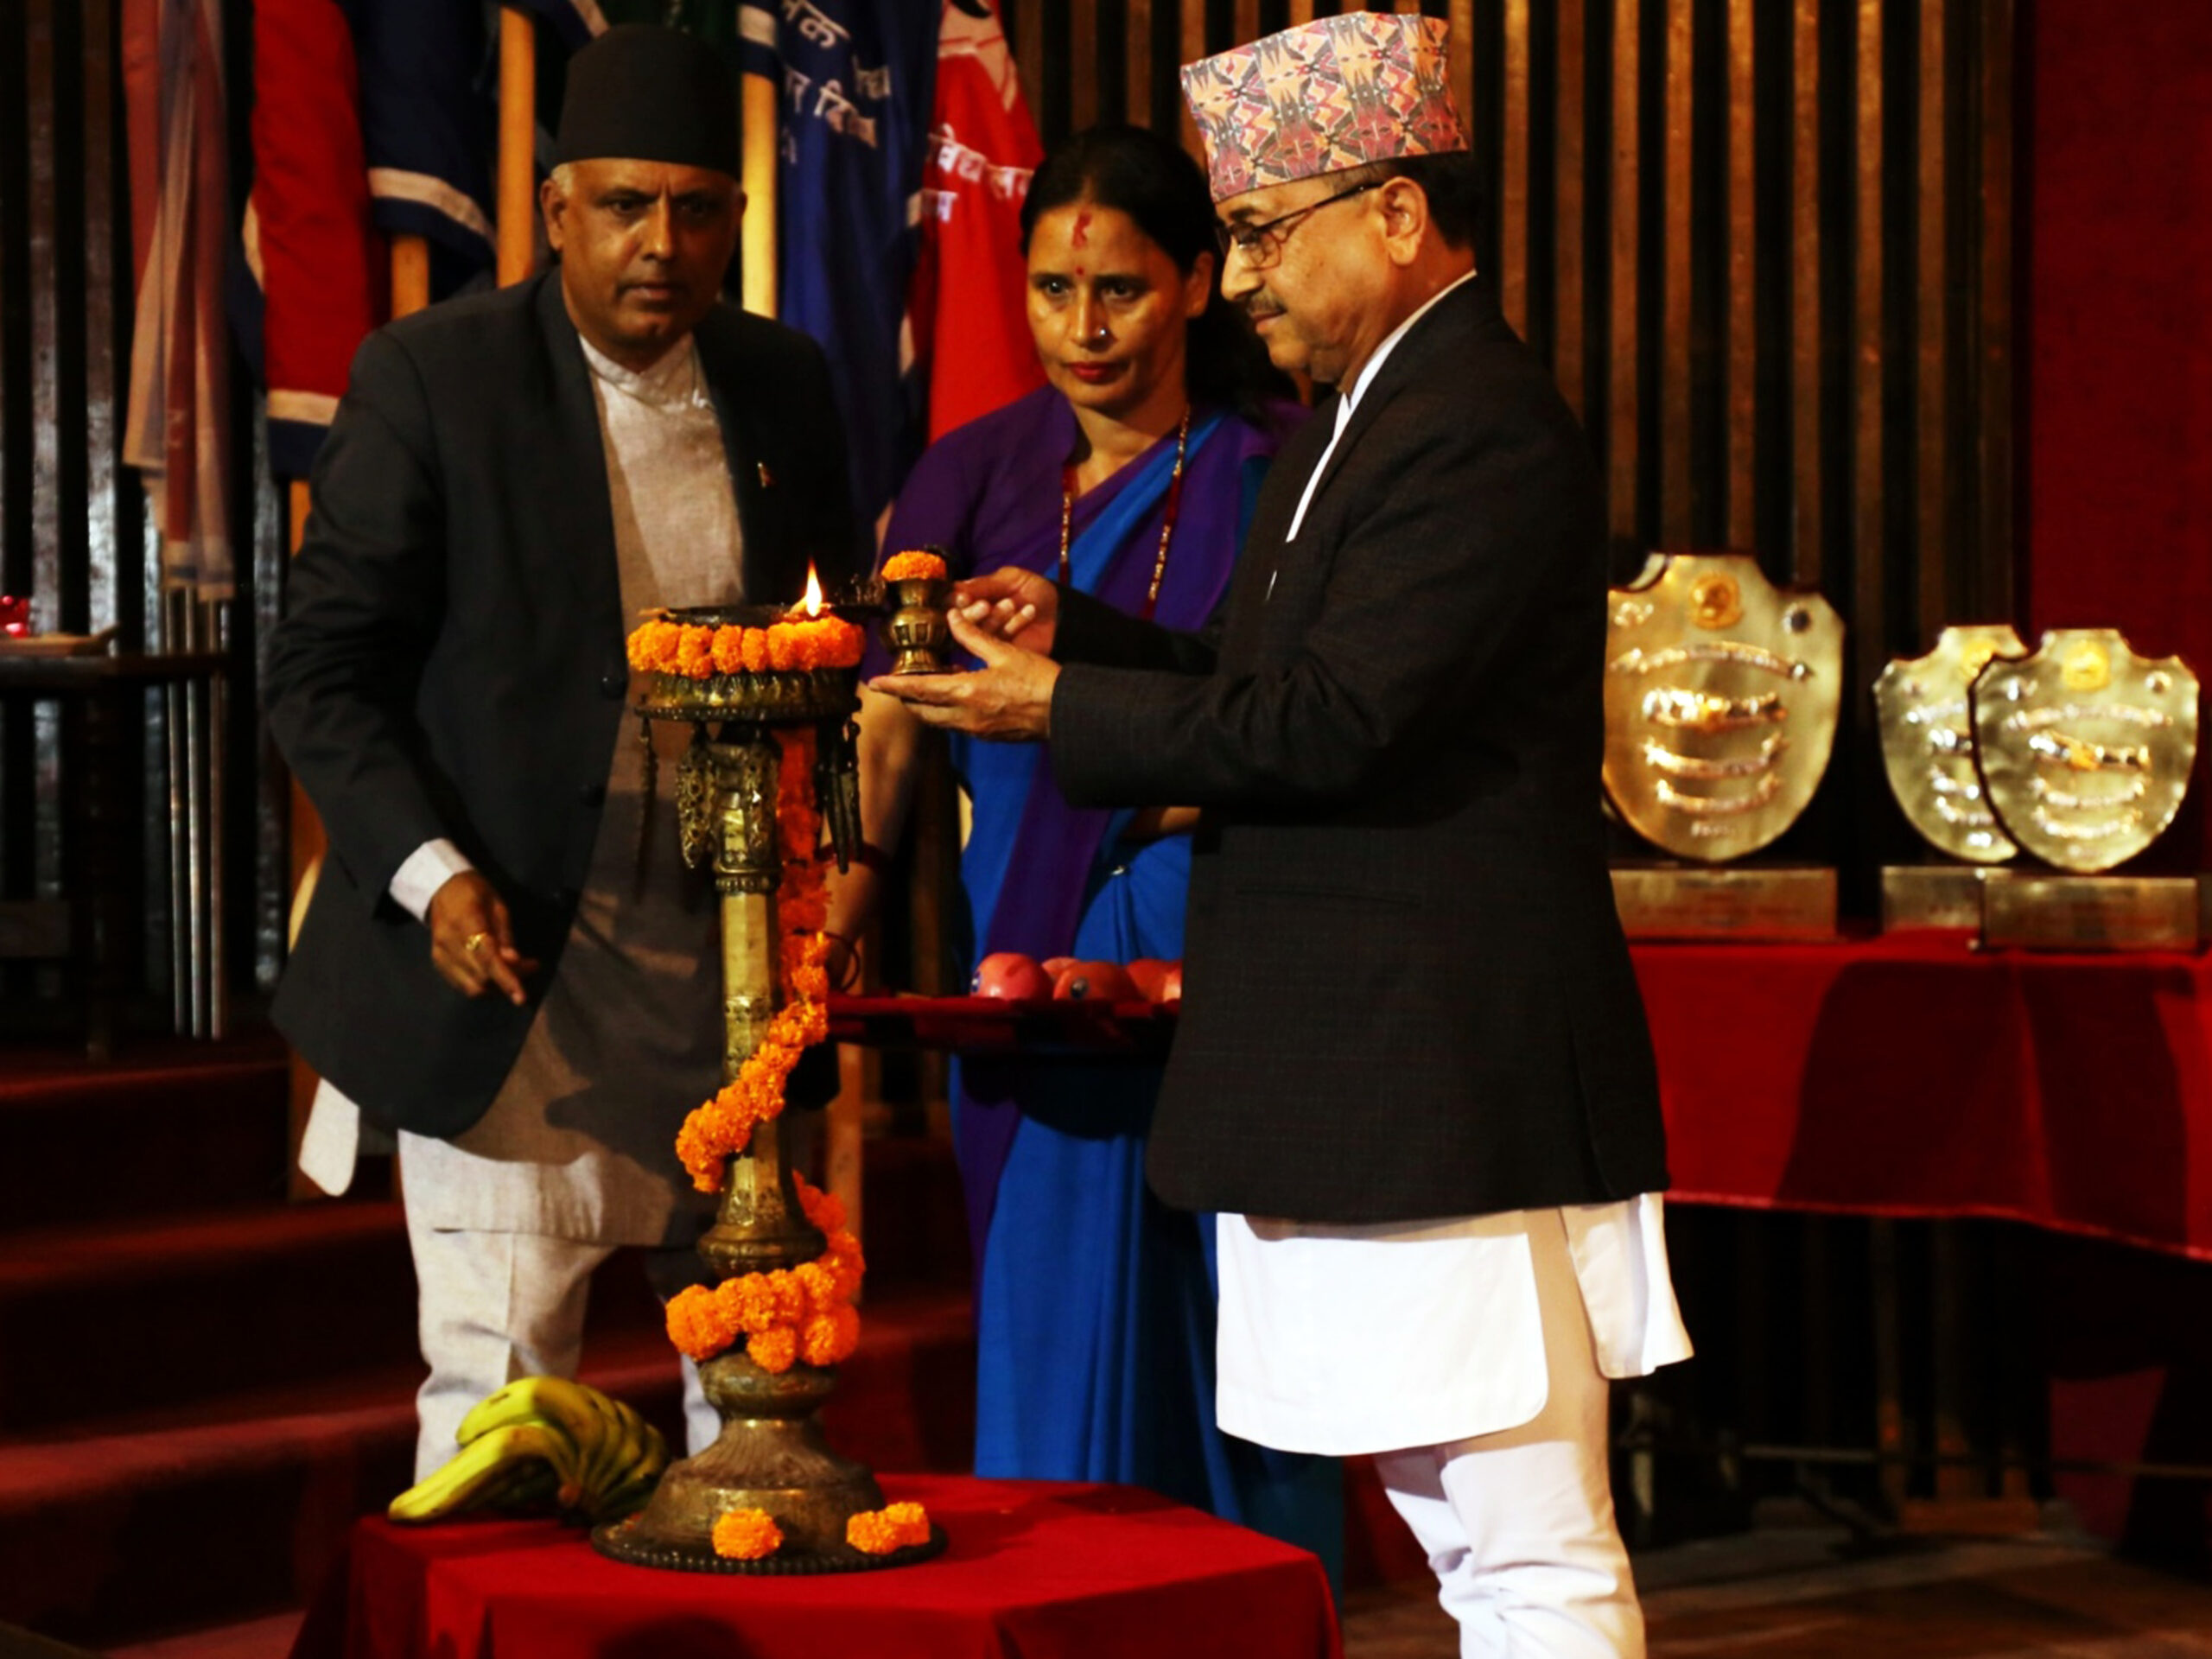 Demands that are not against constitution could be included in School Education Bill: Acting PM Khadka